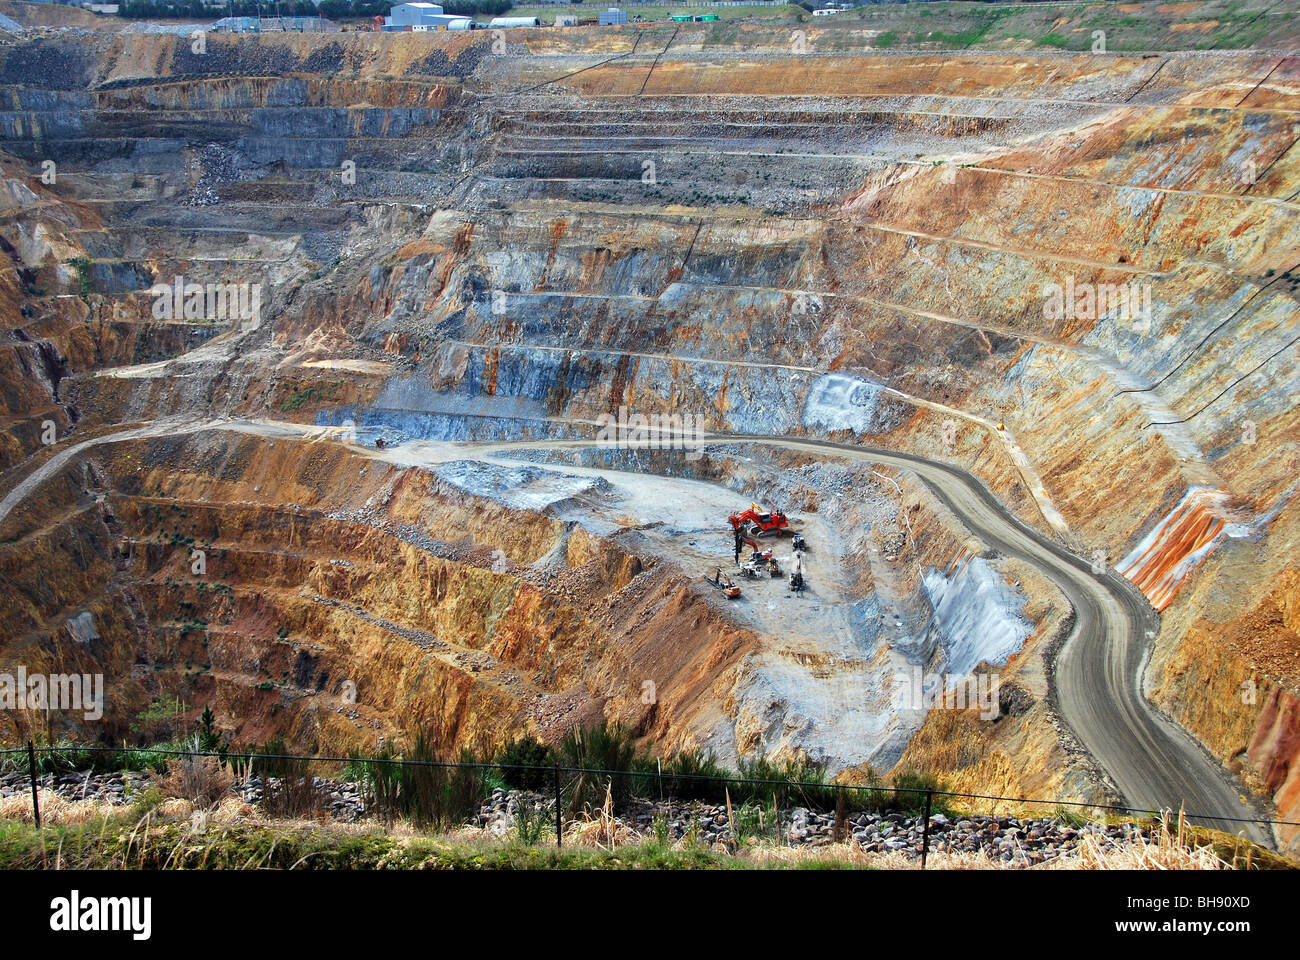 Waihi open cast gold and silver mine, Waihi, North Island, New Zealand, owned by the Newmont Corporation Stock Photo